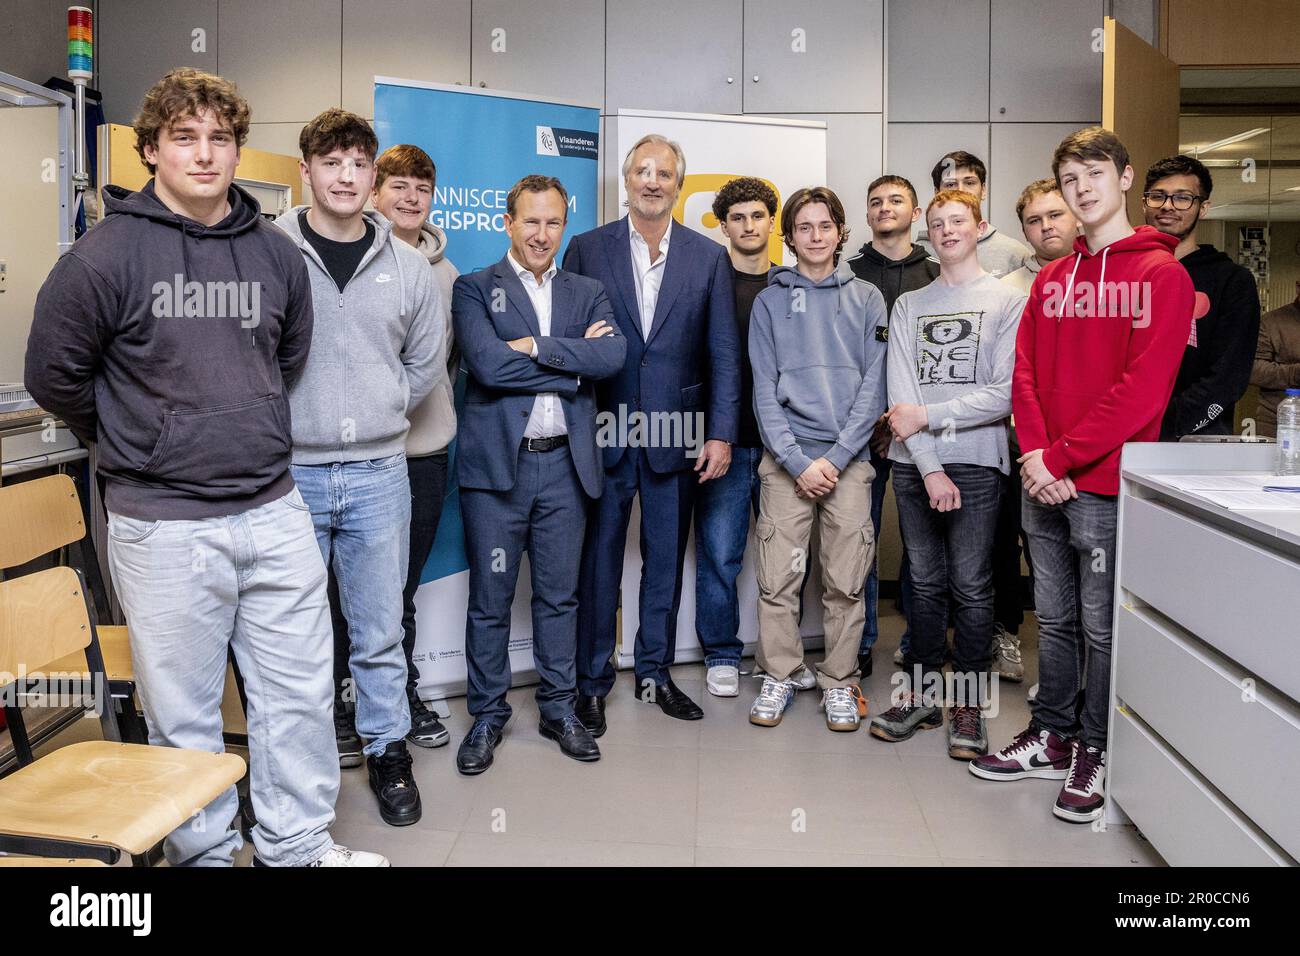 FOCUS COVERAGE REQUESTED TO BELGA - Telenet Business Vice-President Geert Degezelle and Telenet CEO John Porter and students pose for the photographer during a Press moment to launch a new stage in the Digisprong for schools, at the Technisch Instituut Don Bosco secondary school, in Halle, Monday 08 May 2023. It concerns a framework contract worth 40 million euros between Telenet and the Flemish government, to install fiber optic connections in Flemish schools. Credit: Belga News Agency/Alamy Live News Stock Photo